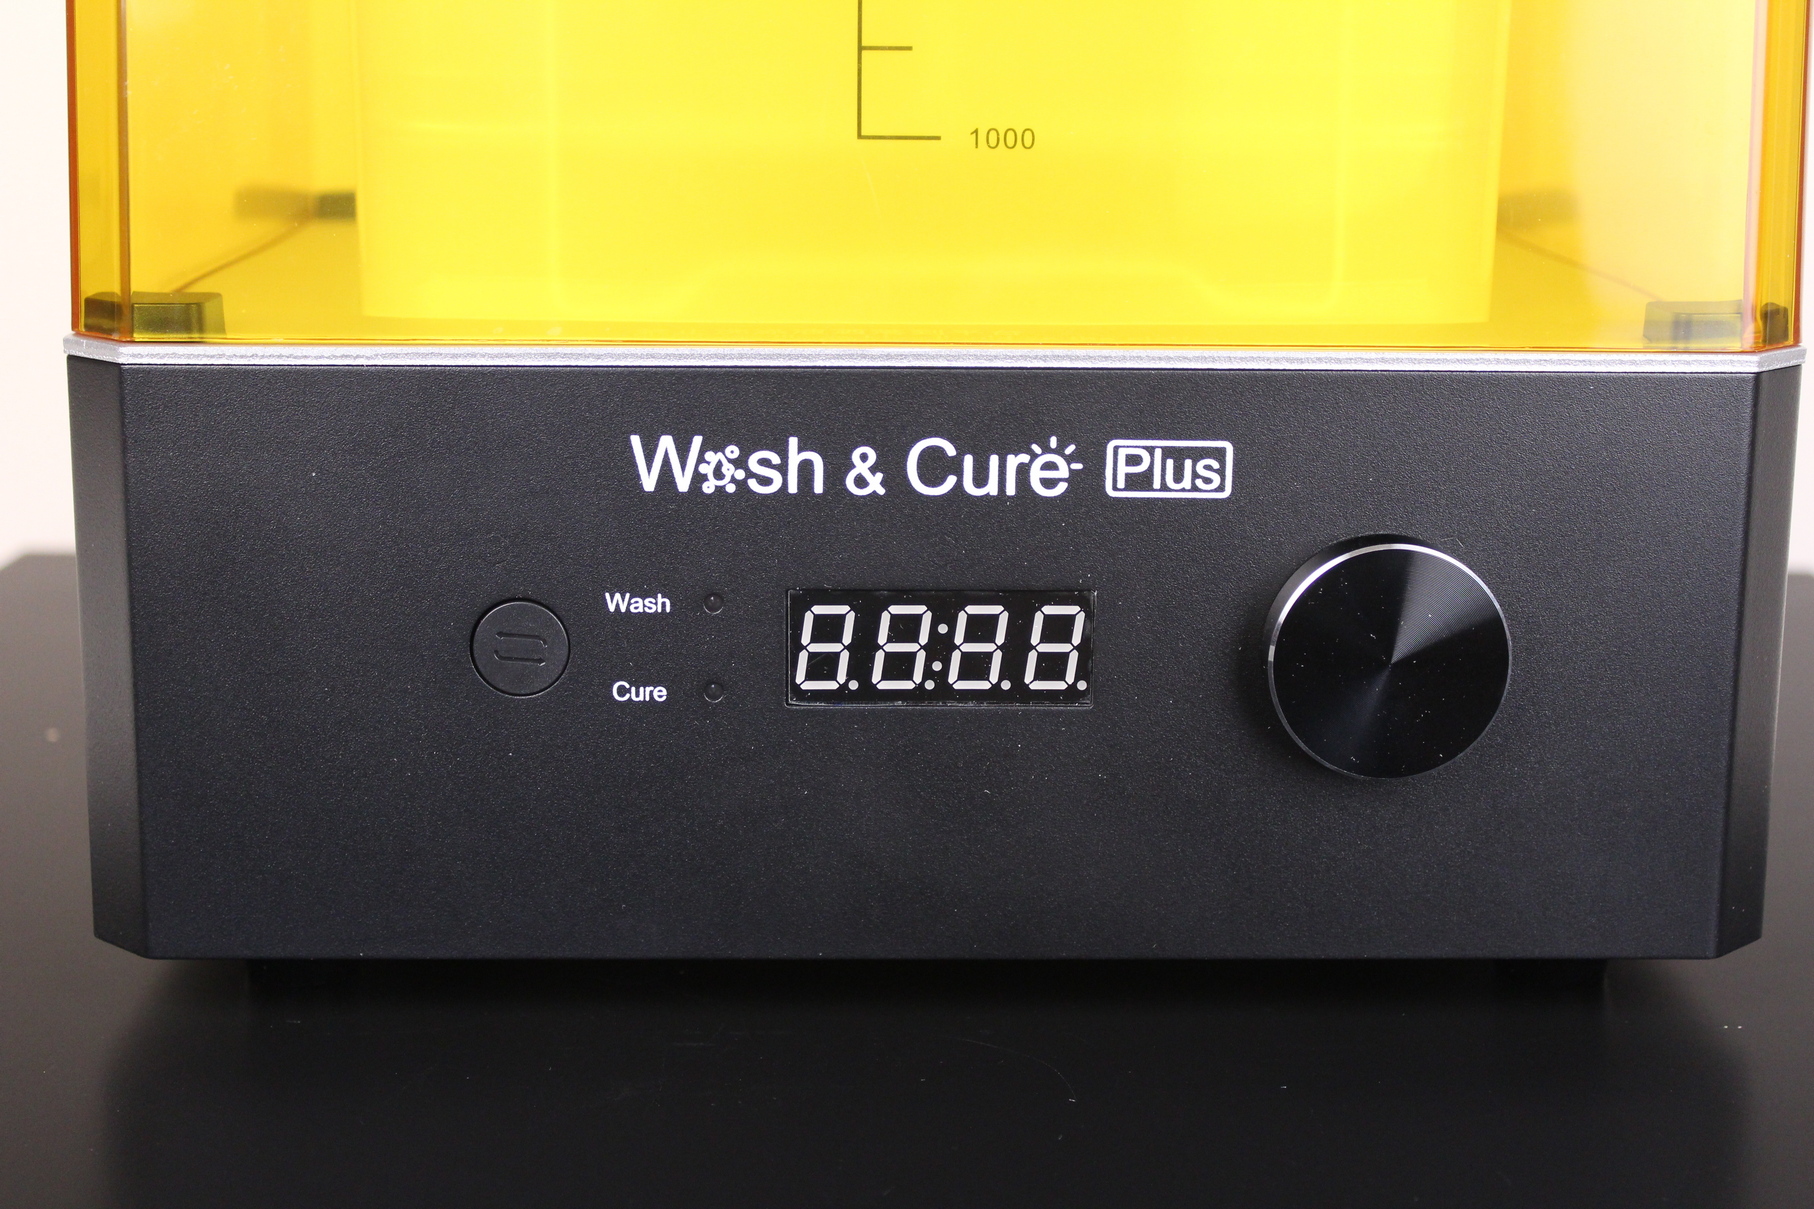 Buy Anycubic Wash & Cure Plus Machine